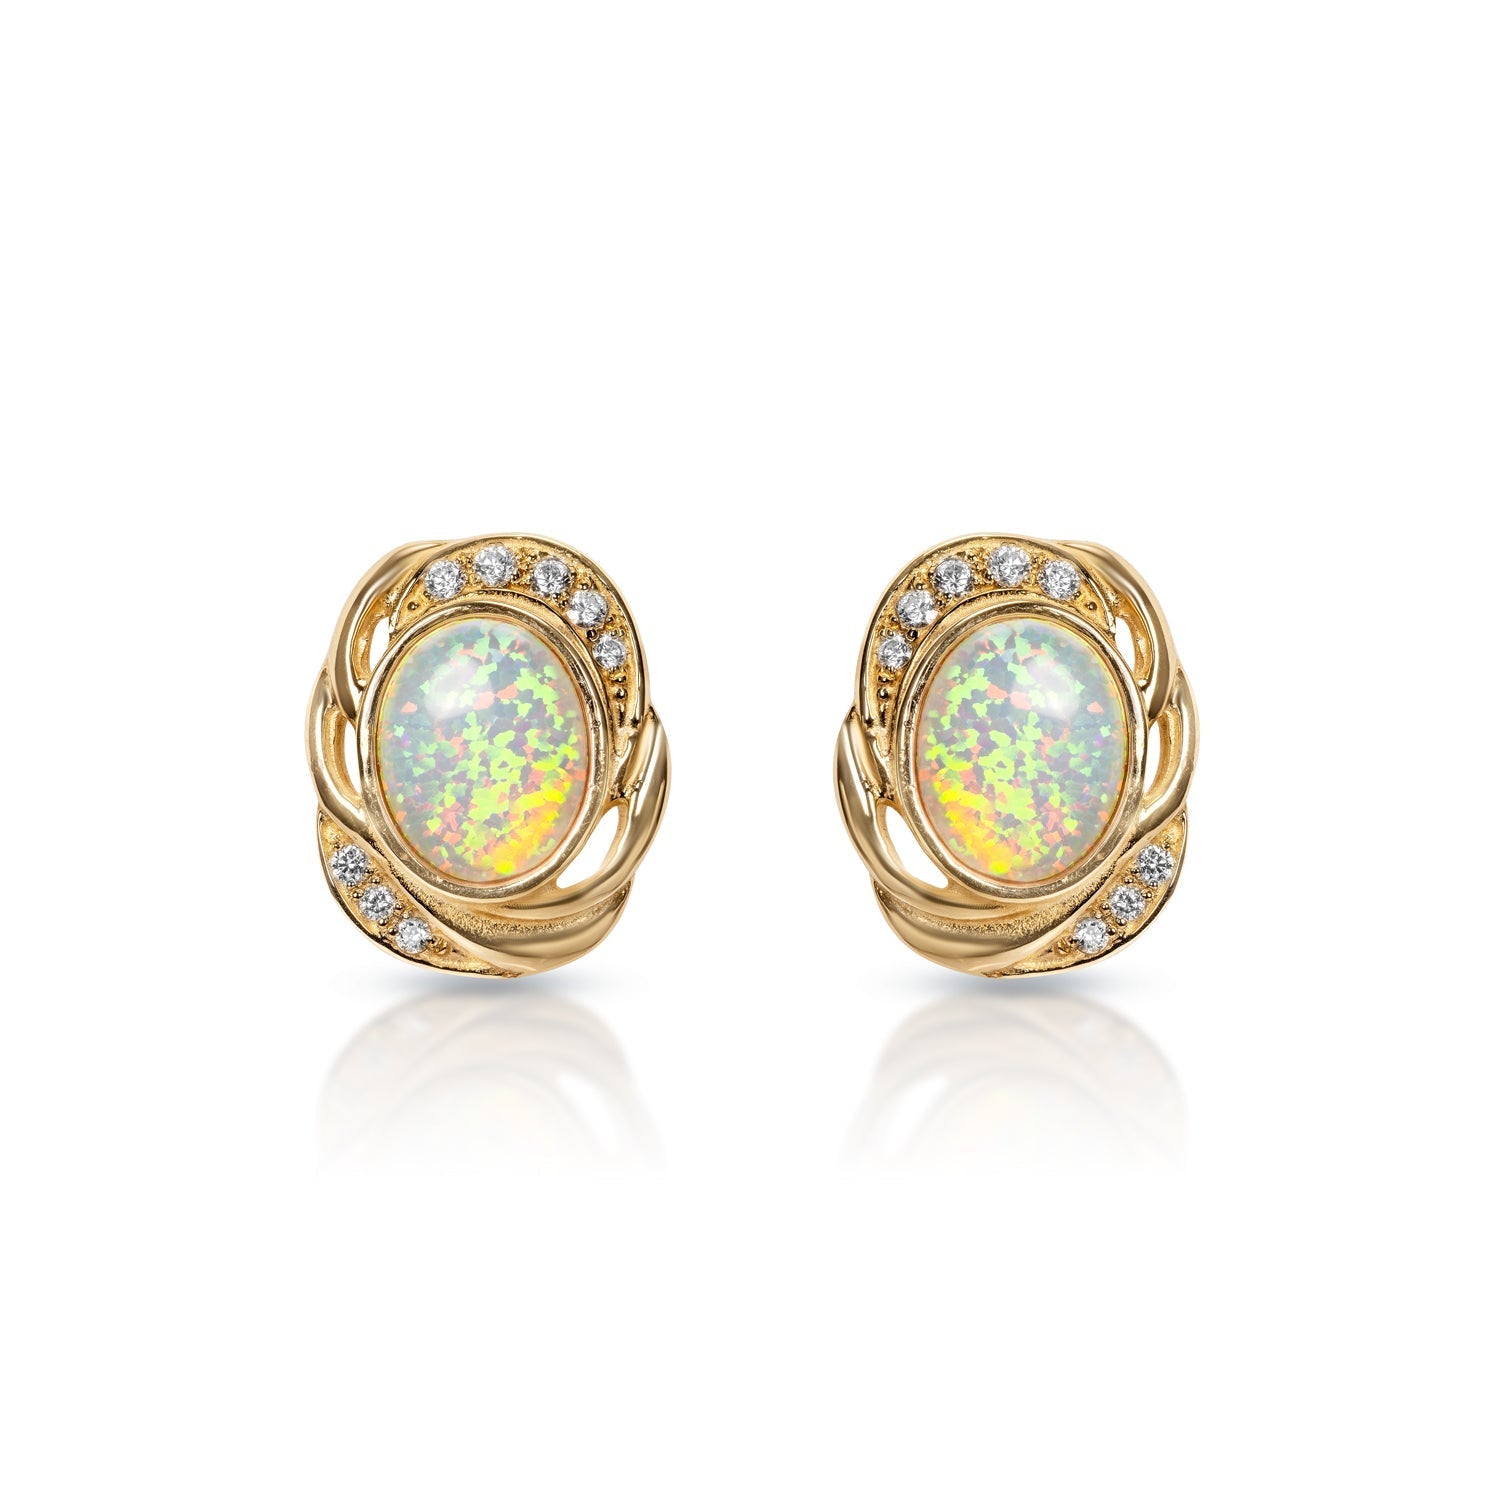 Mary 0.25 Carats 16 Diamonds Round Brilliant Stud Earrings in 14k Yellow Gold Front View